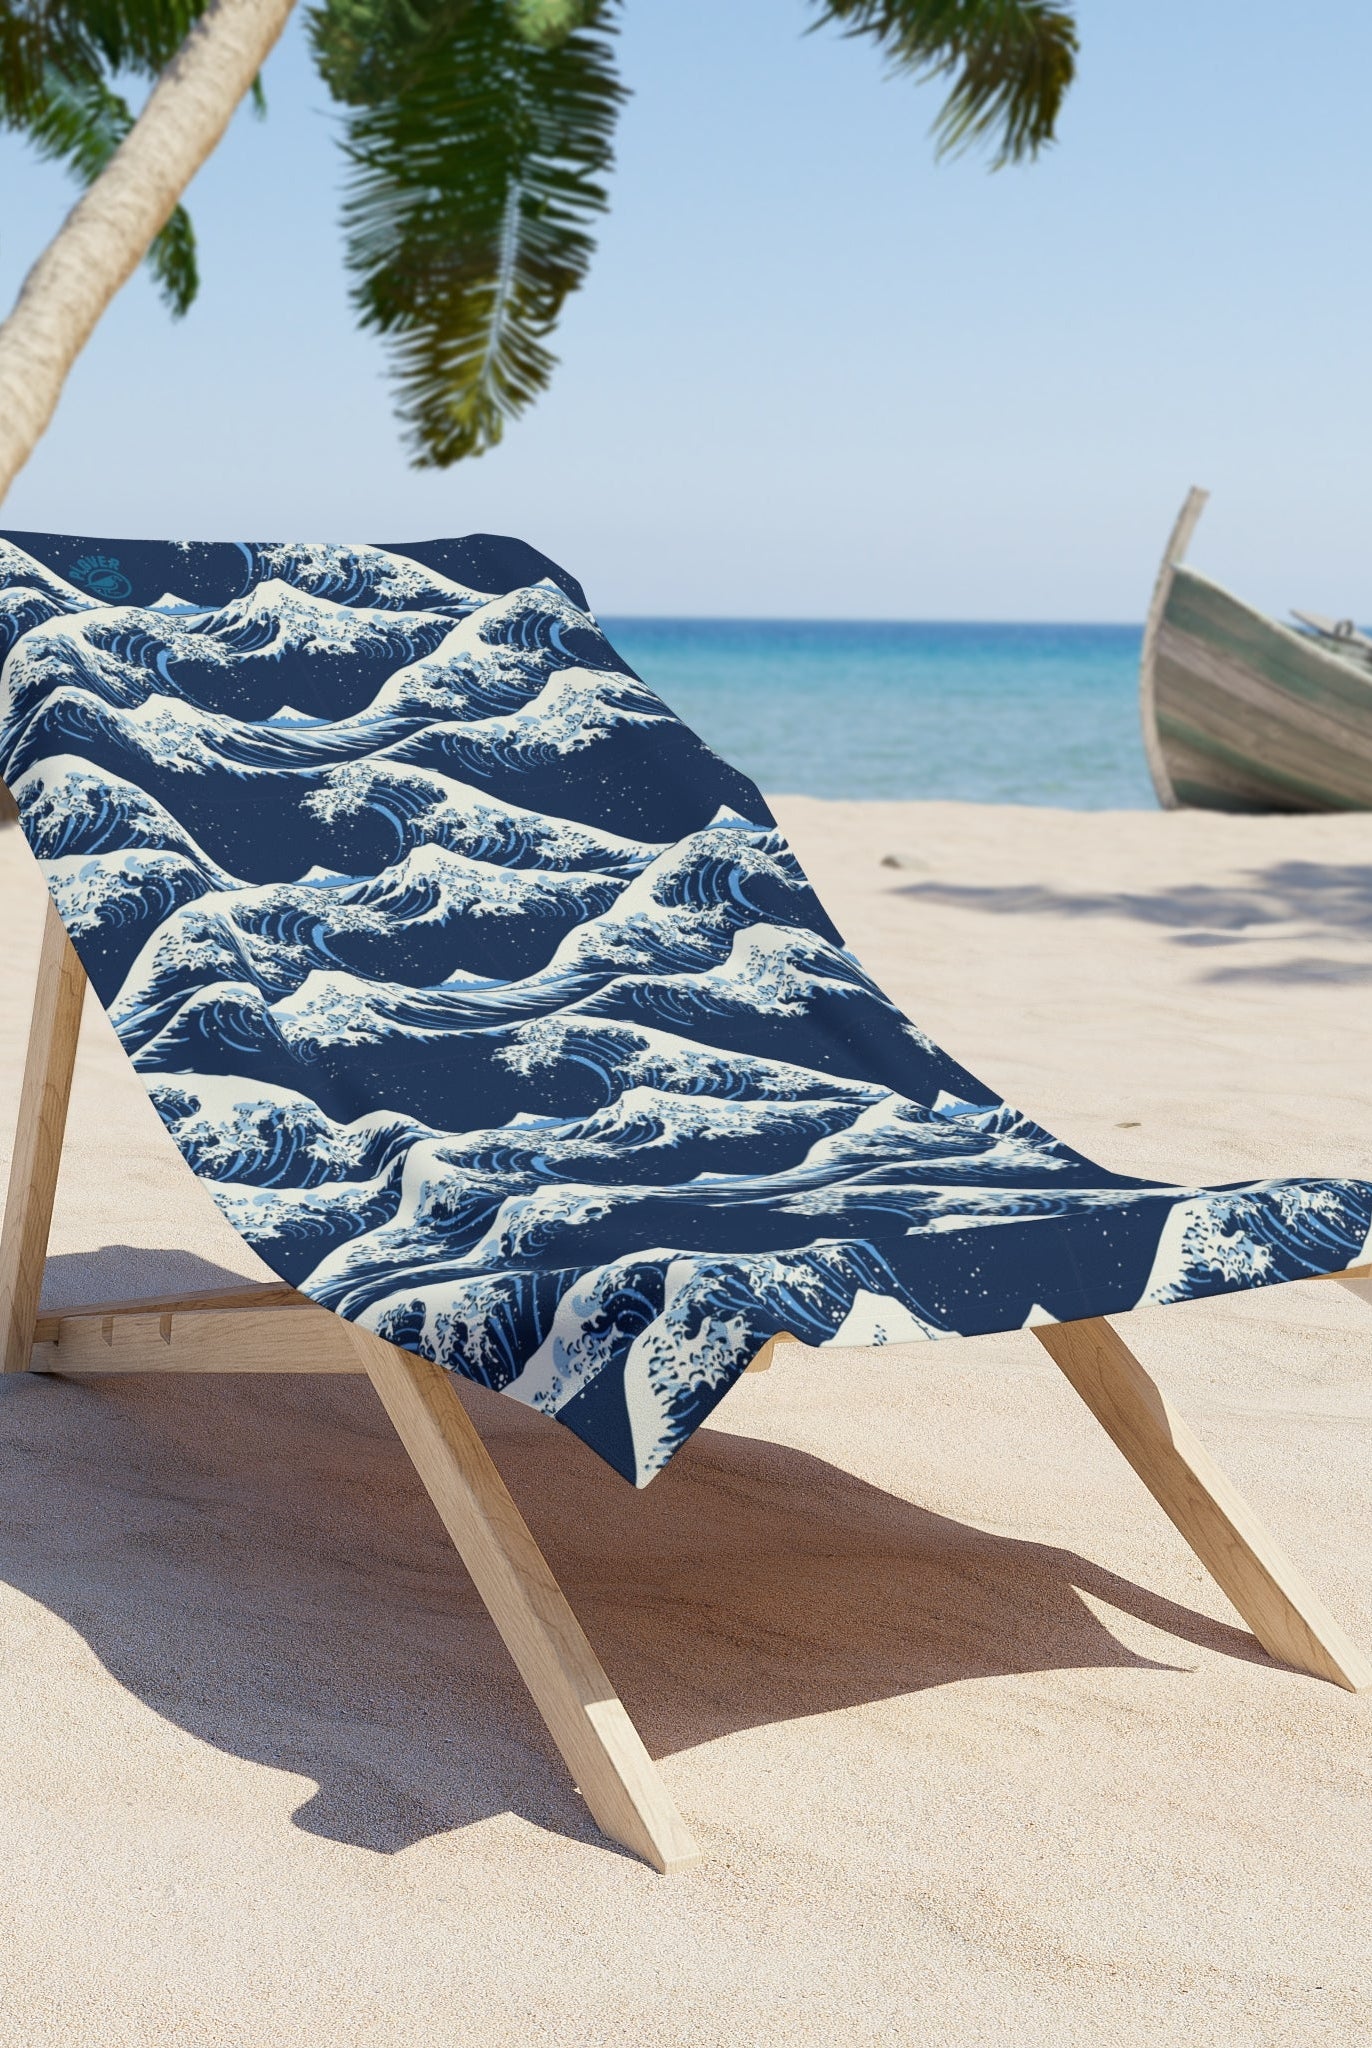 Wave Beach Towel - Plover Robes